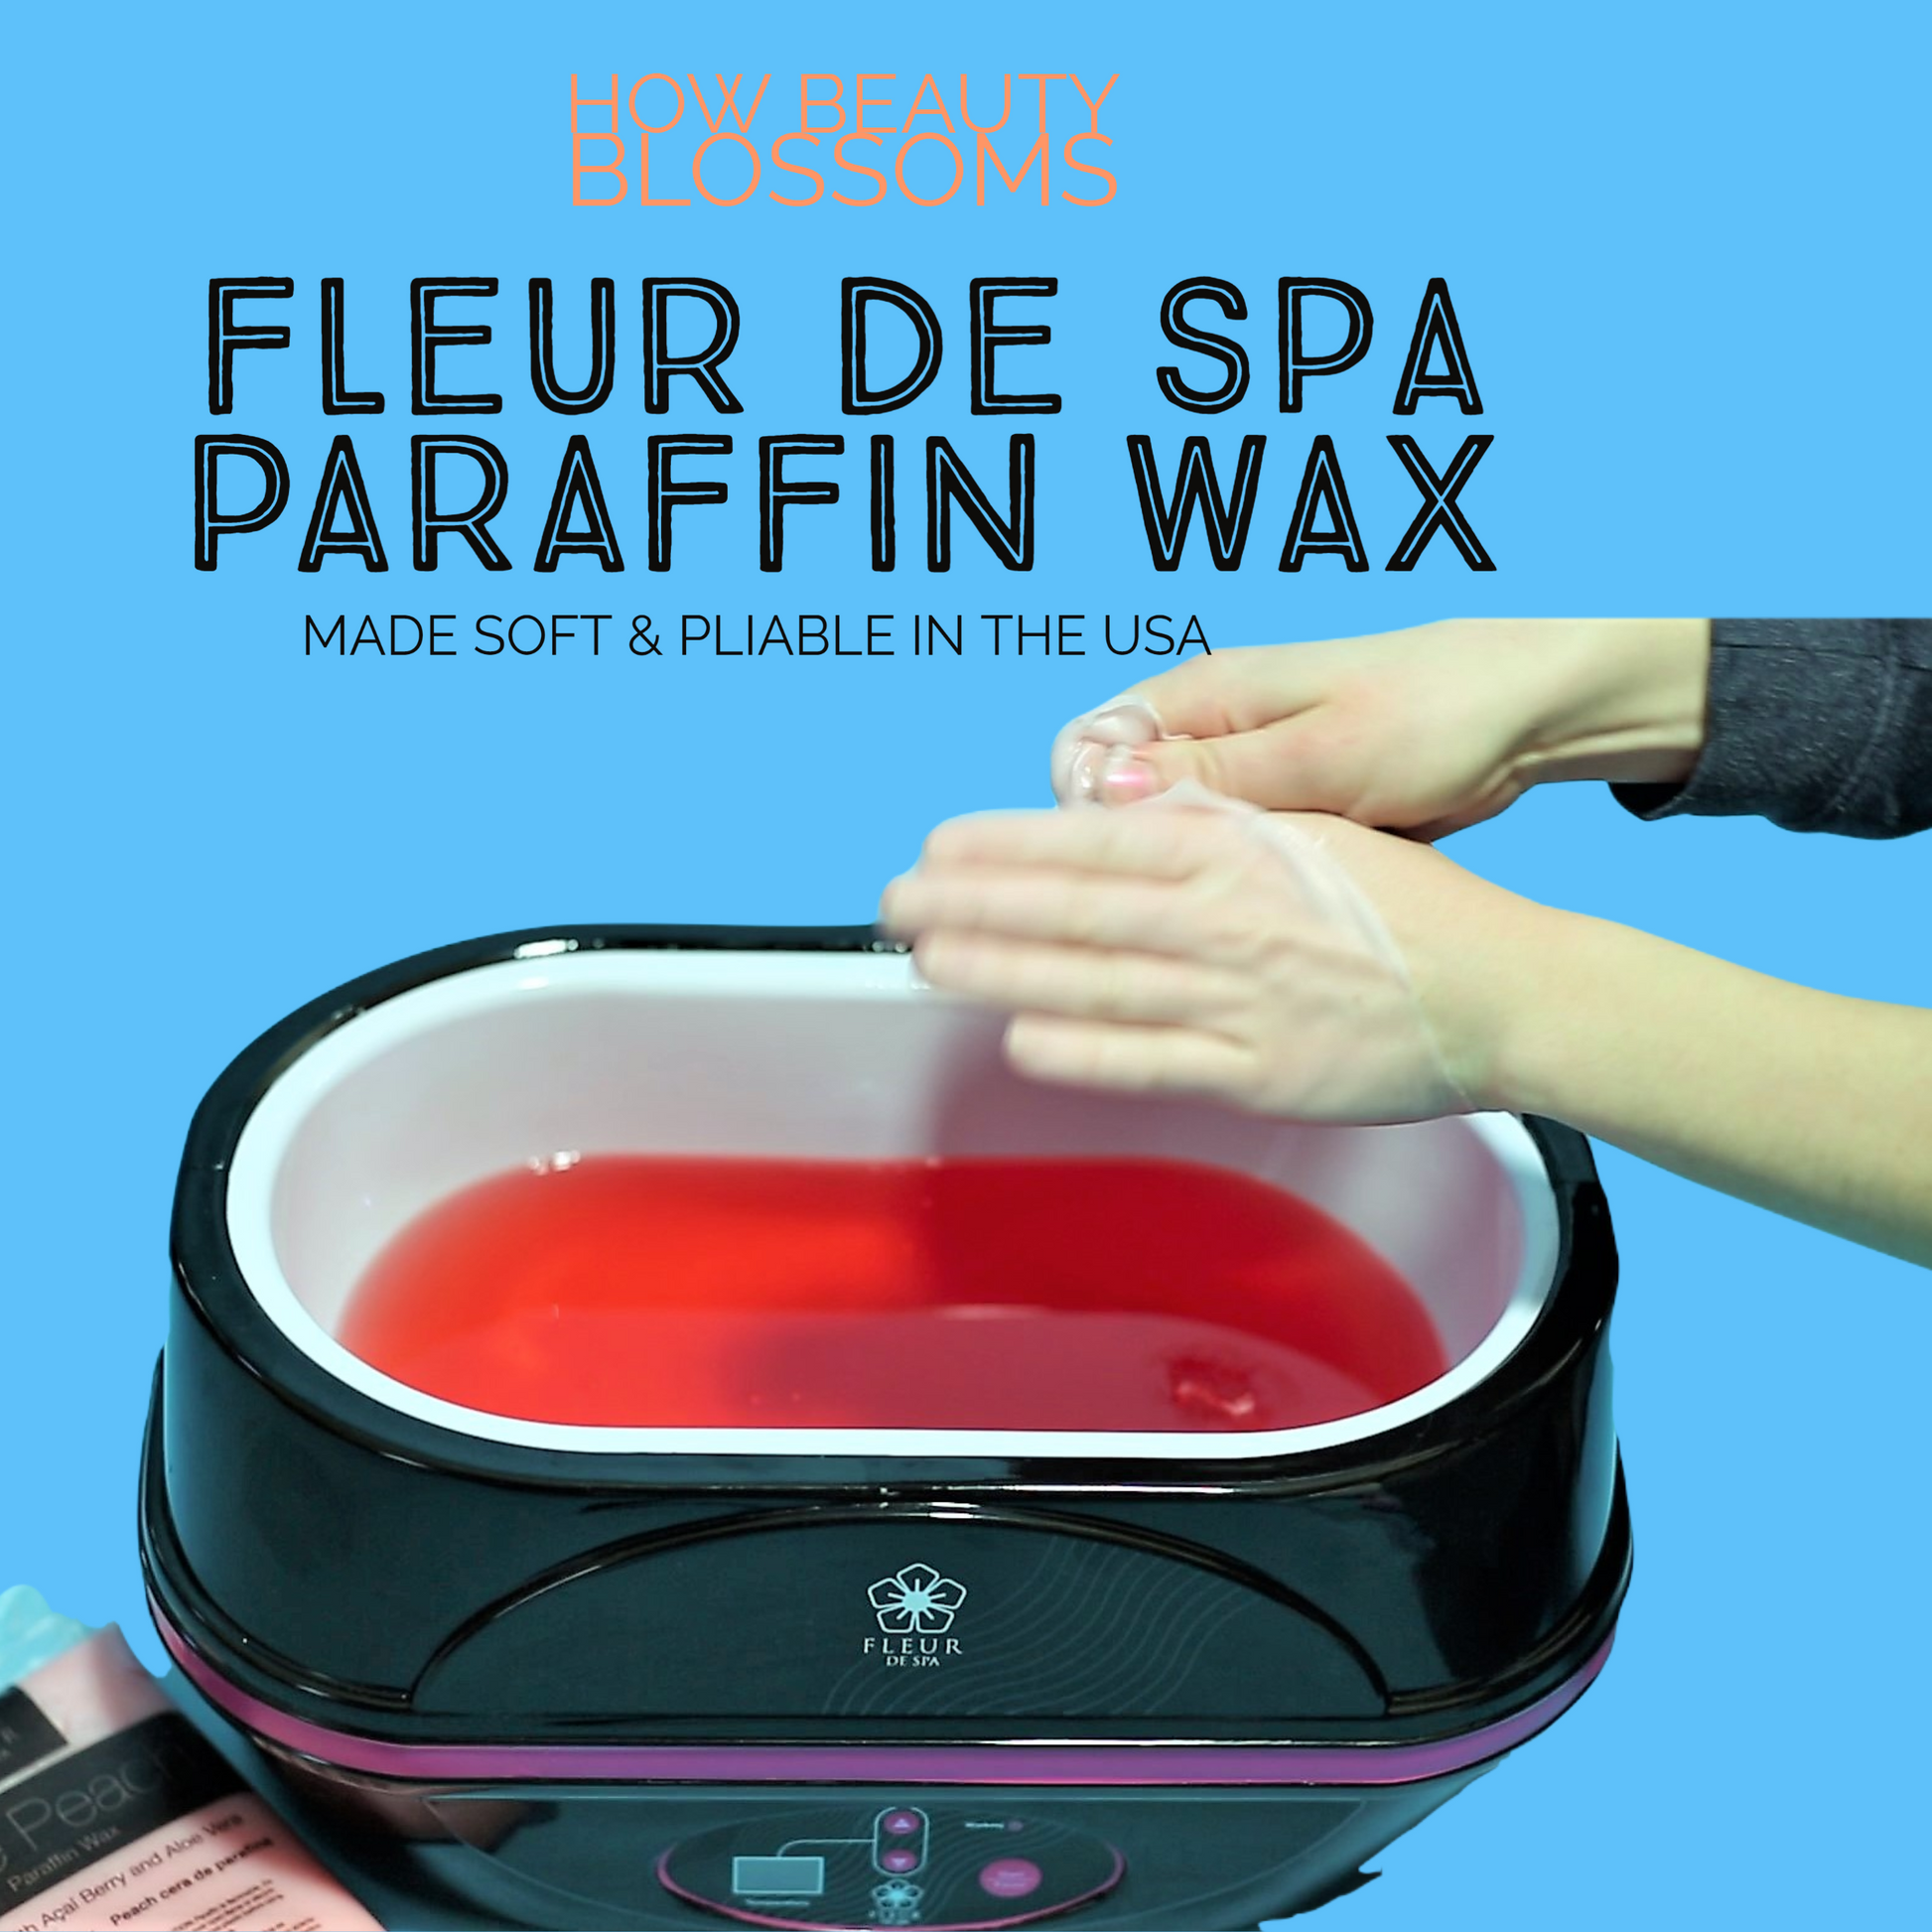 Buy Wholesale Thailand High Quality Paraffin Wax For Candle/supply Parafin  Fully Refined Paraffin Wax & High Quality Paraffin Wax For Candle at USD  300